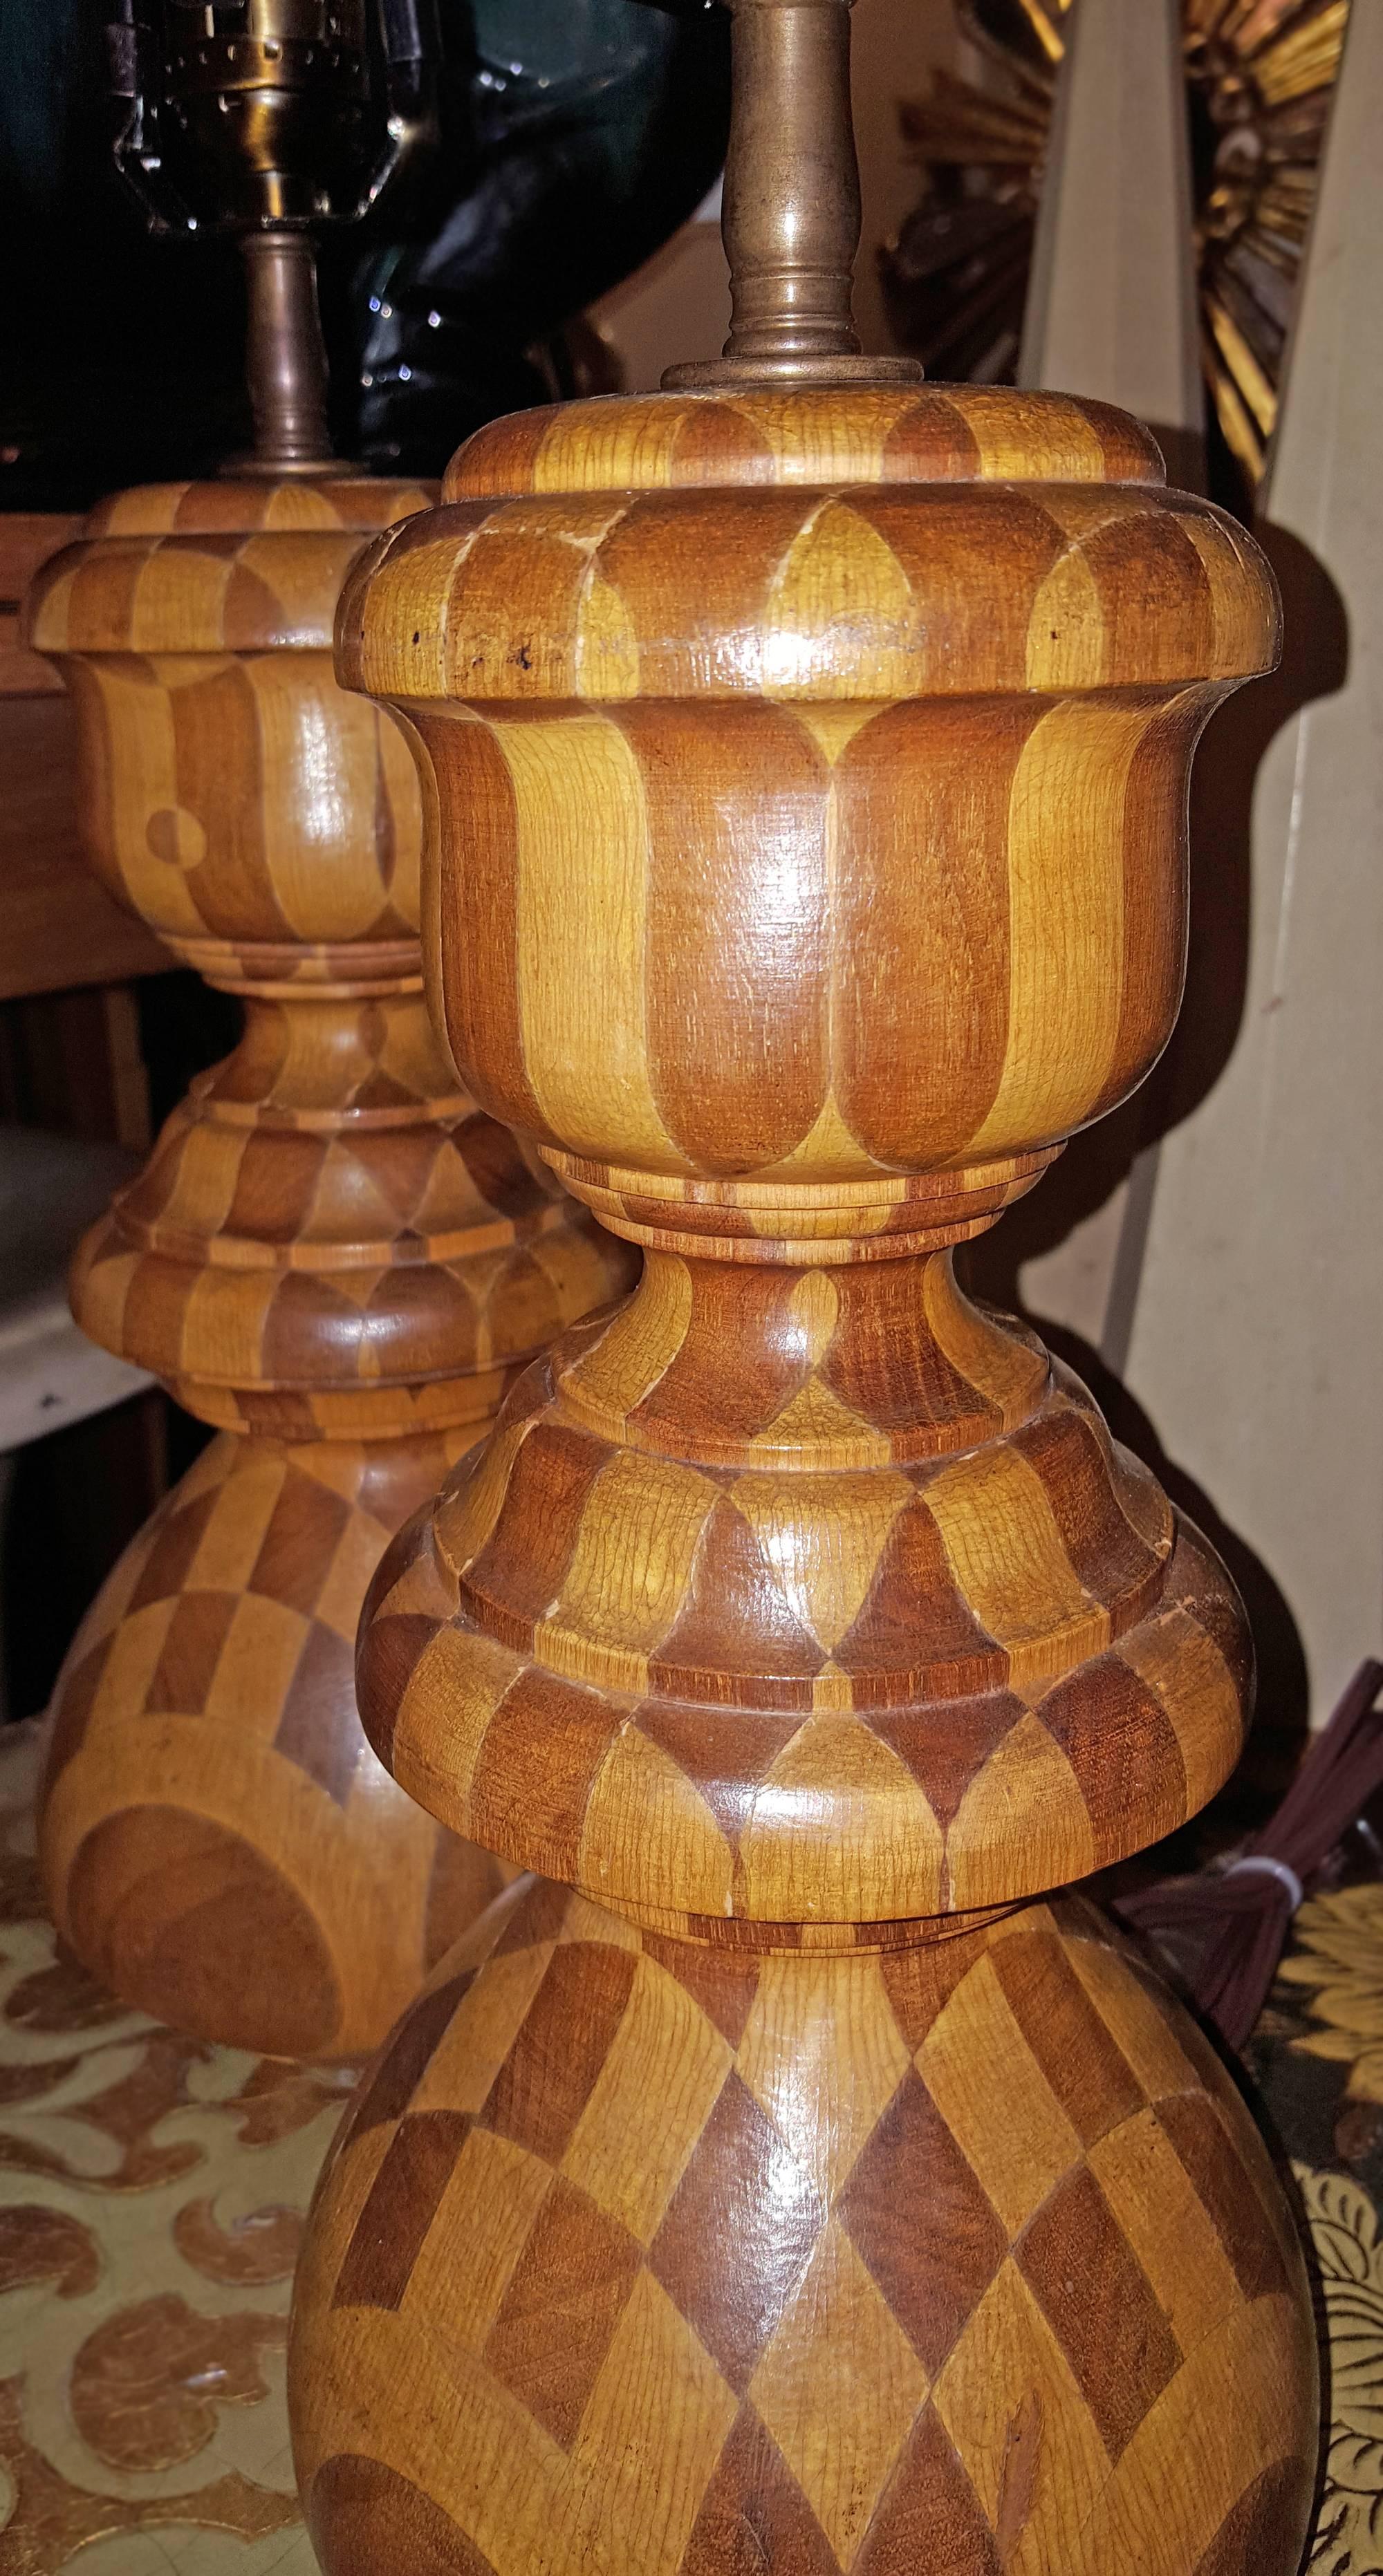 Pair of 1930s American table lamps, checkerboard pattern inlaid wood.

Measurements:
12.5